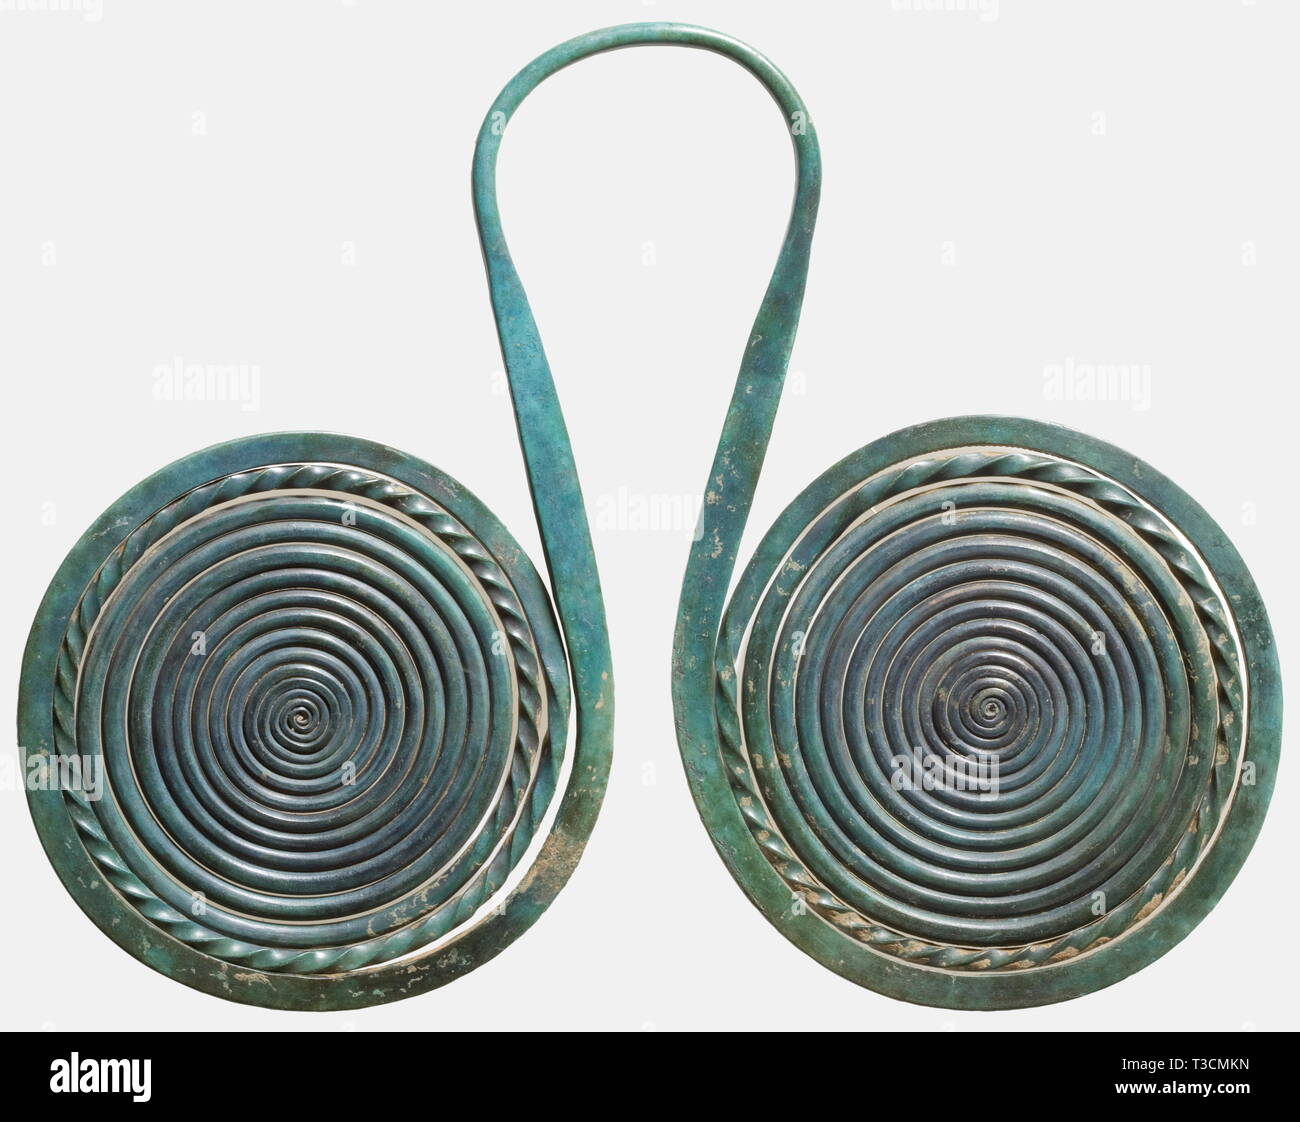 A large double spiral pendant, Central Europe, Bronze Age, ca. 1000 B.C. Bronze with fine, emerald green noble patina. Finely crafted double spiral with central suspension loop. The bronze wire partially twisted, the front embellished with a finely incised geometrical pattern. The right side with reinforced crack. Width 21.5 cm. historic, historical, ancient world, ancient world, ancient times, object, objects, stills, clipping, cut out, cut-out, cut-outs, Additional-Rights-Clearance-Info-Not-Available Stock Photo